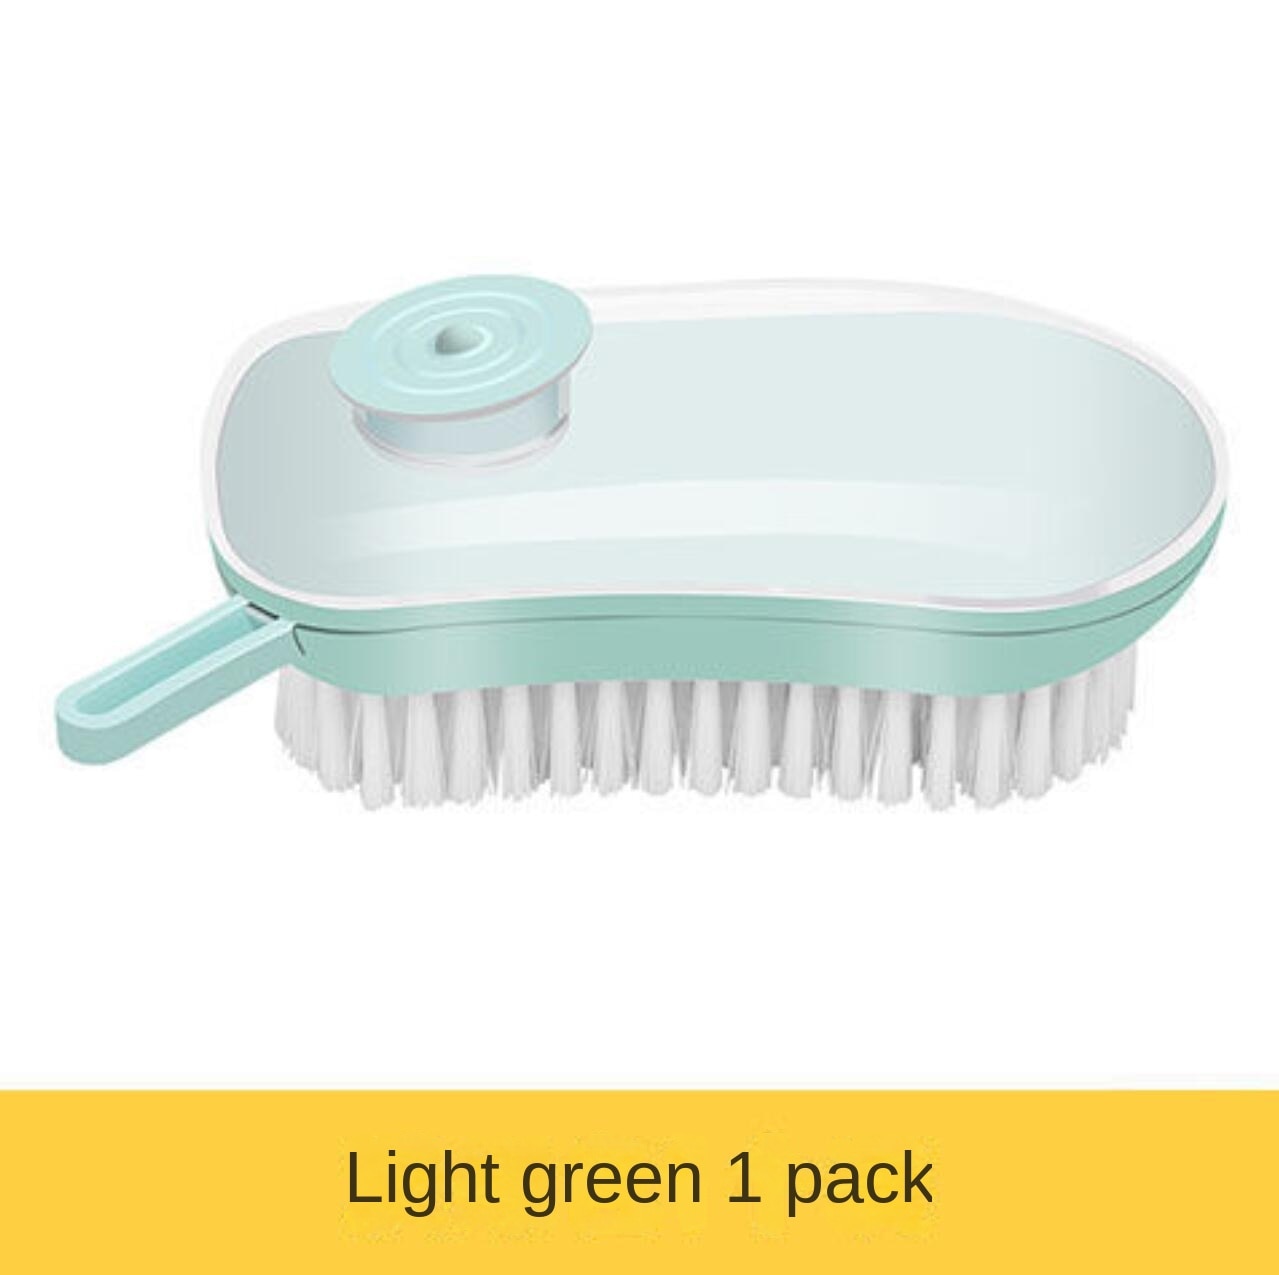 Multifunctional Liquid Cleaning Household Brush Clothes